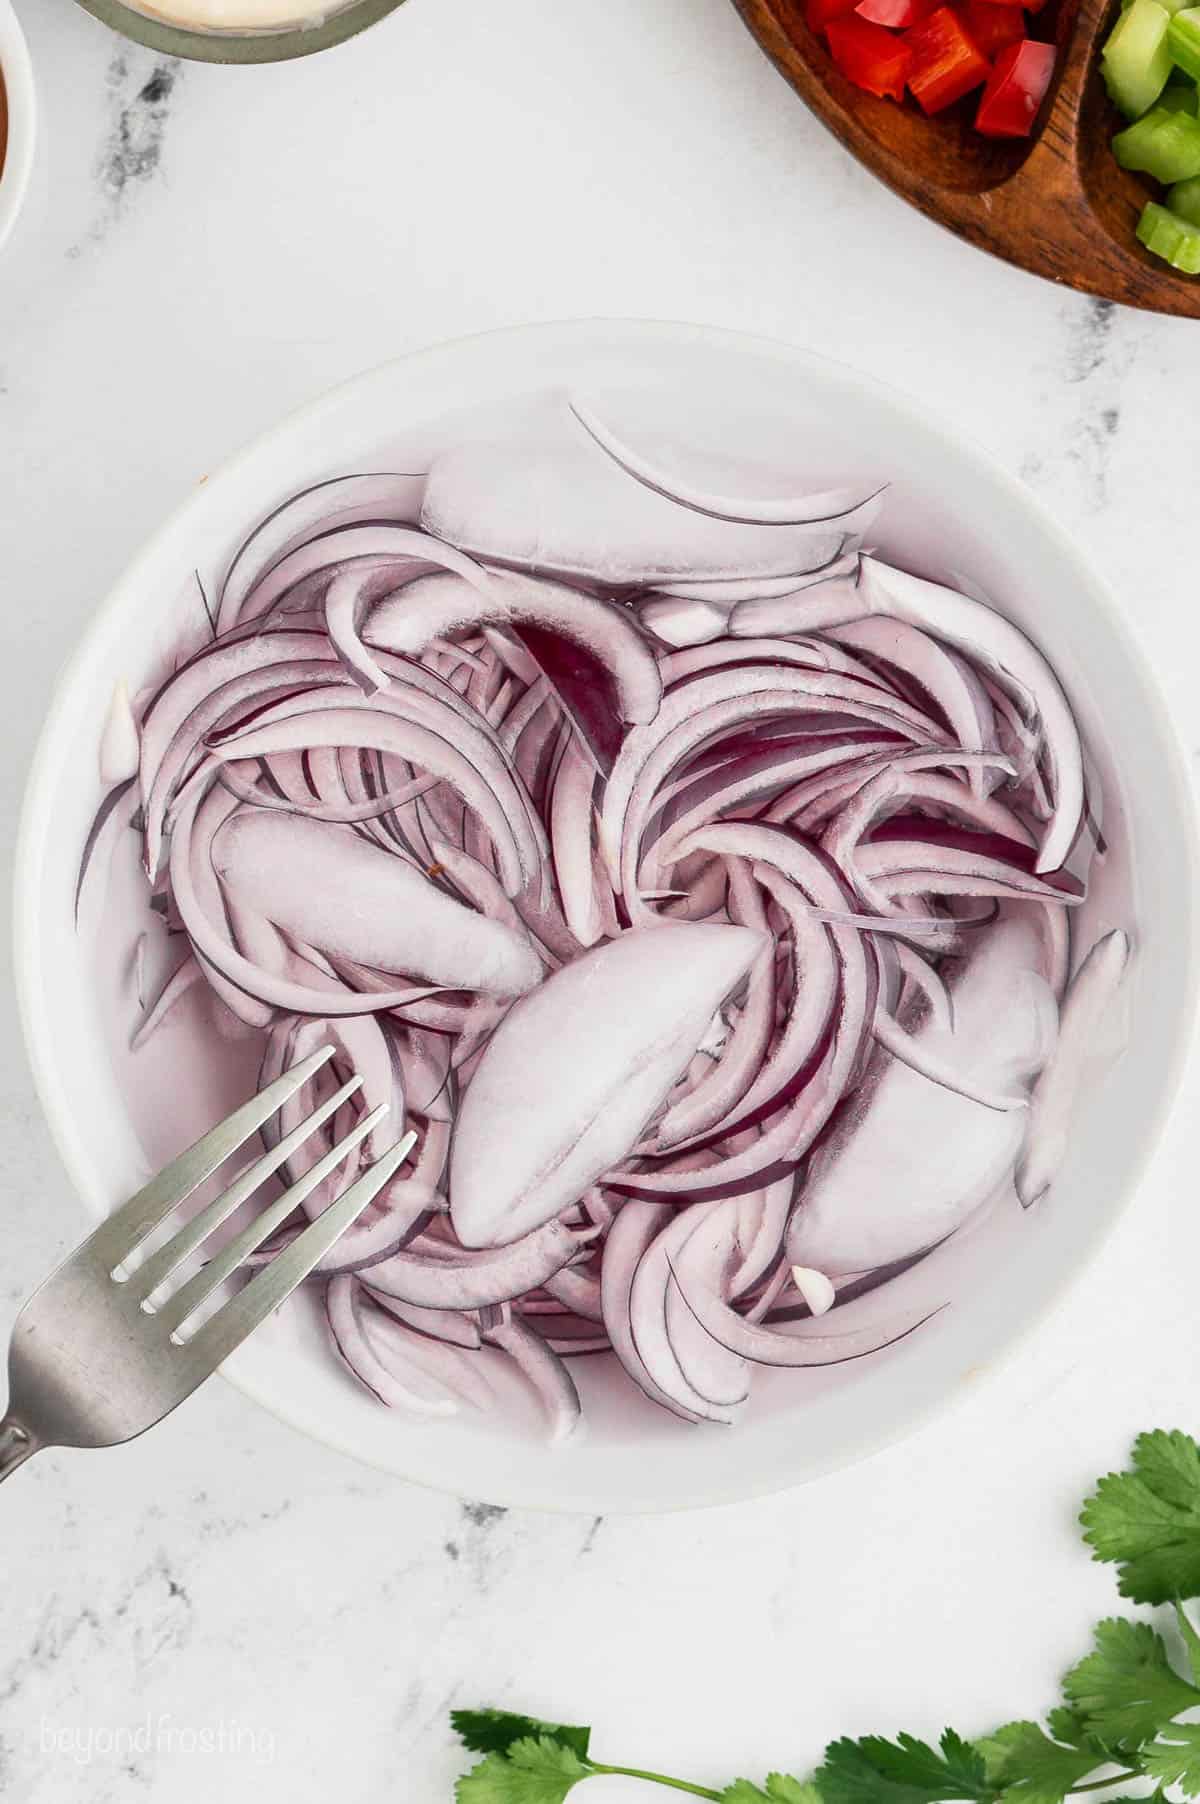 Sliced onions in water